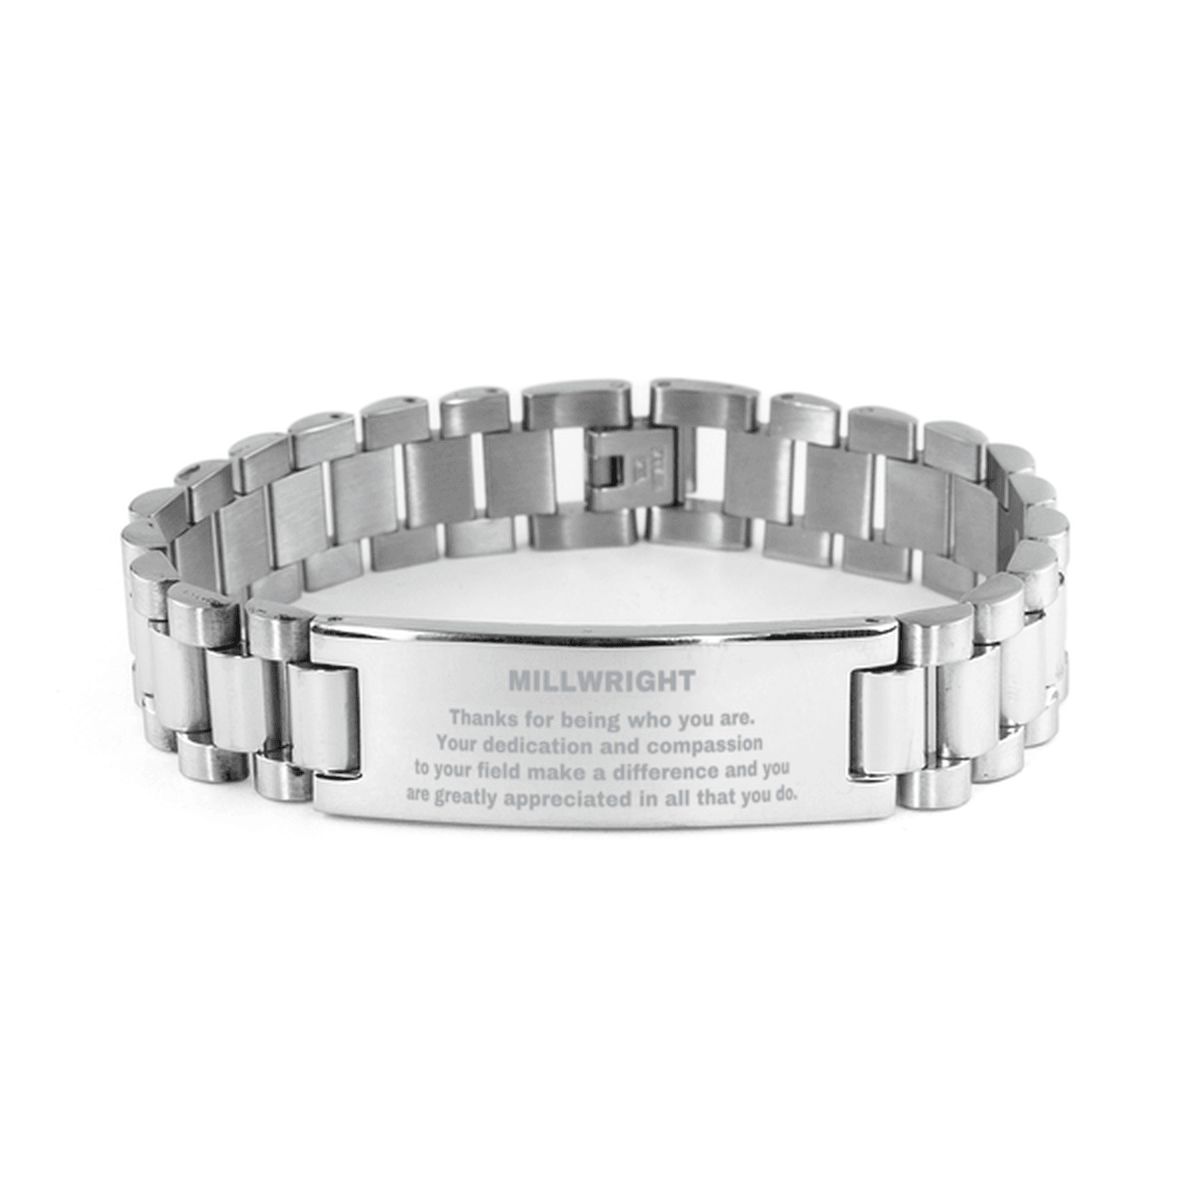 Millwright Ladder Stainless Steel Engraved Bracelet - Thanks for being who you are - Birthday Christmas Jewelry Gifts Coworkers Colleague Boss - Mallard Moon Gift Shop